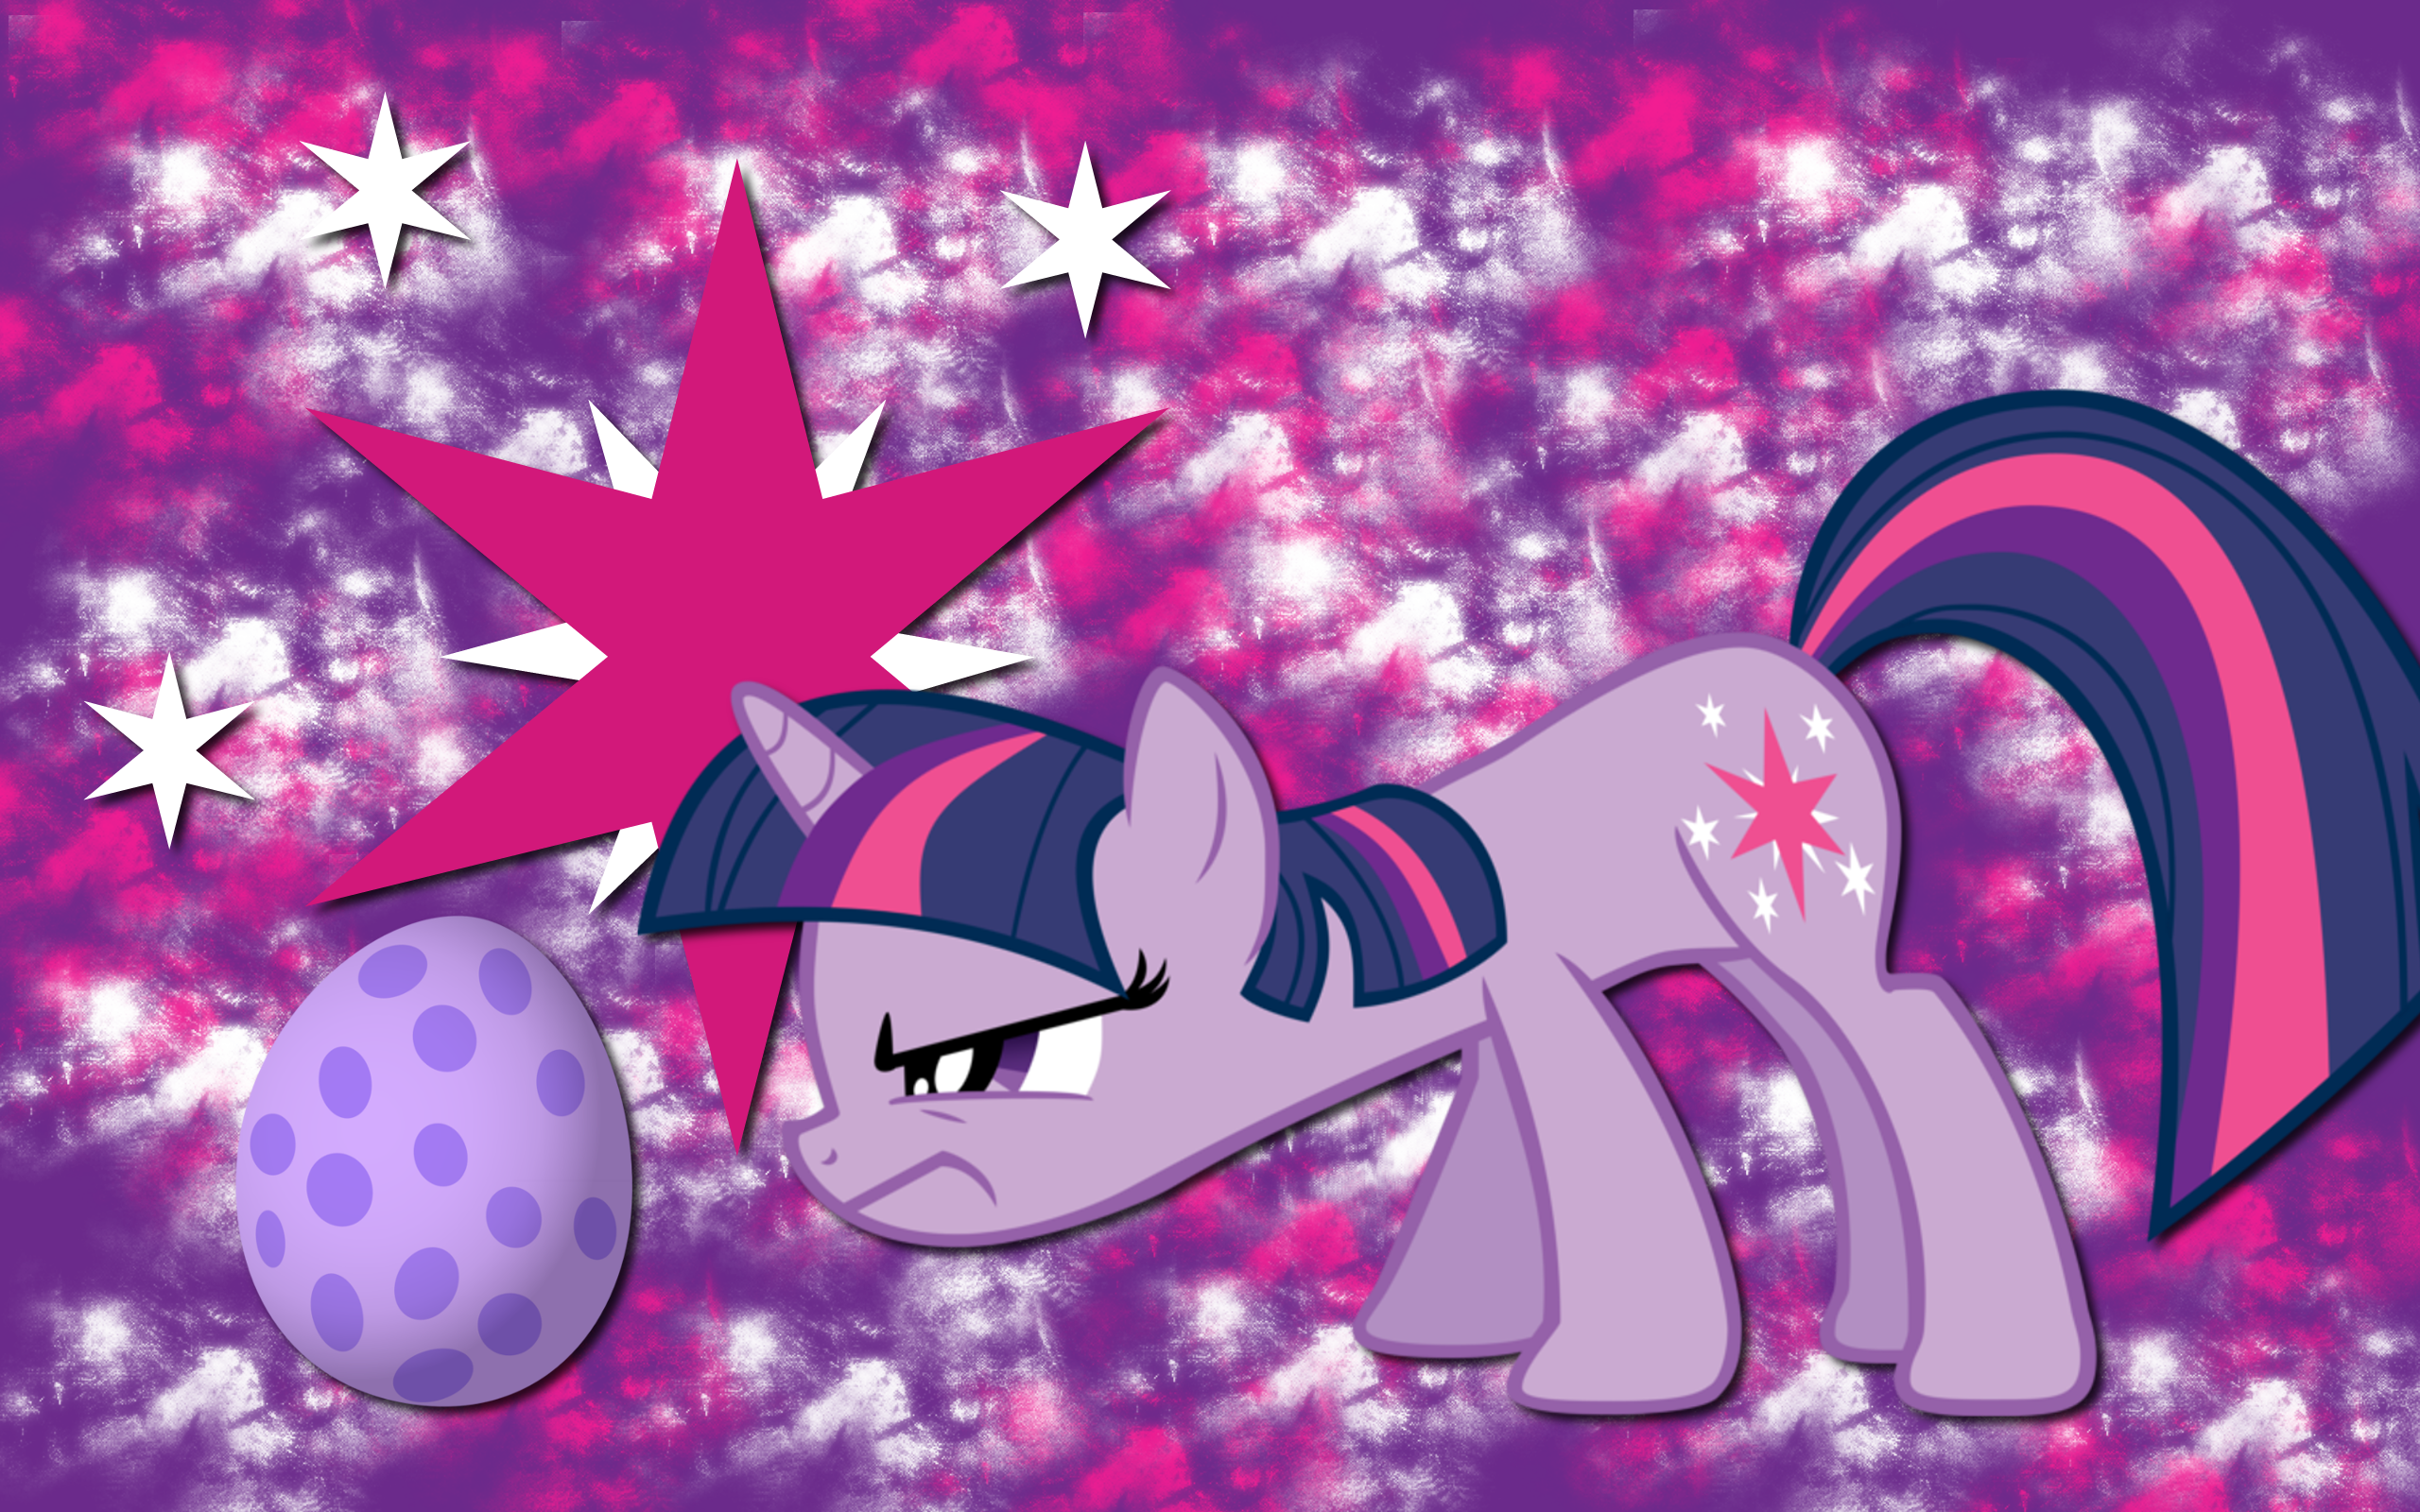 Twilight Sparkle wallpaper 11 by AliceHumanSacrifice0, Chromadancer, ooklah and The-Smiling-Pony